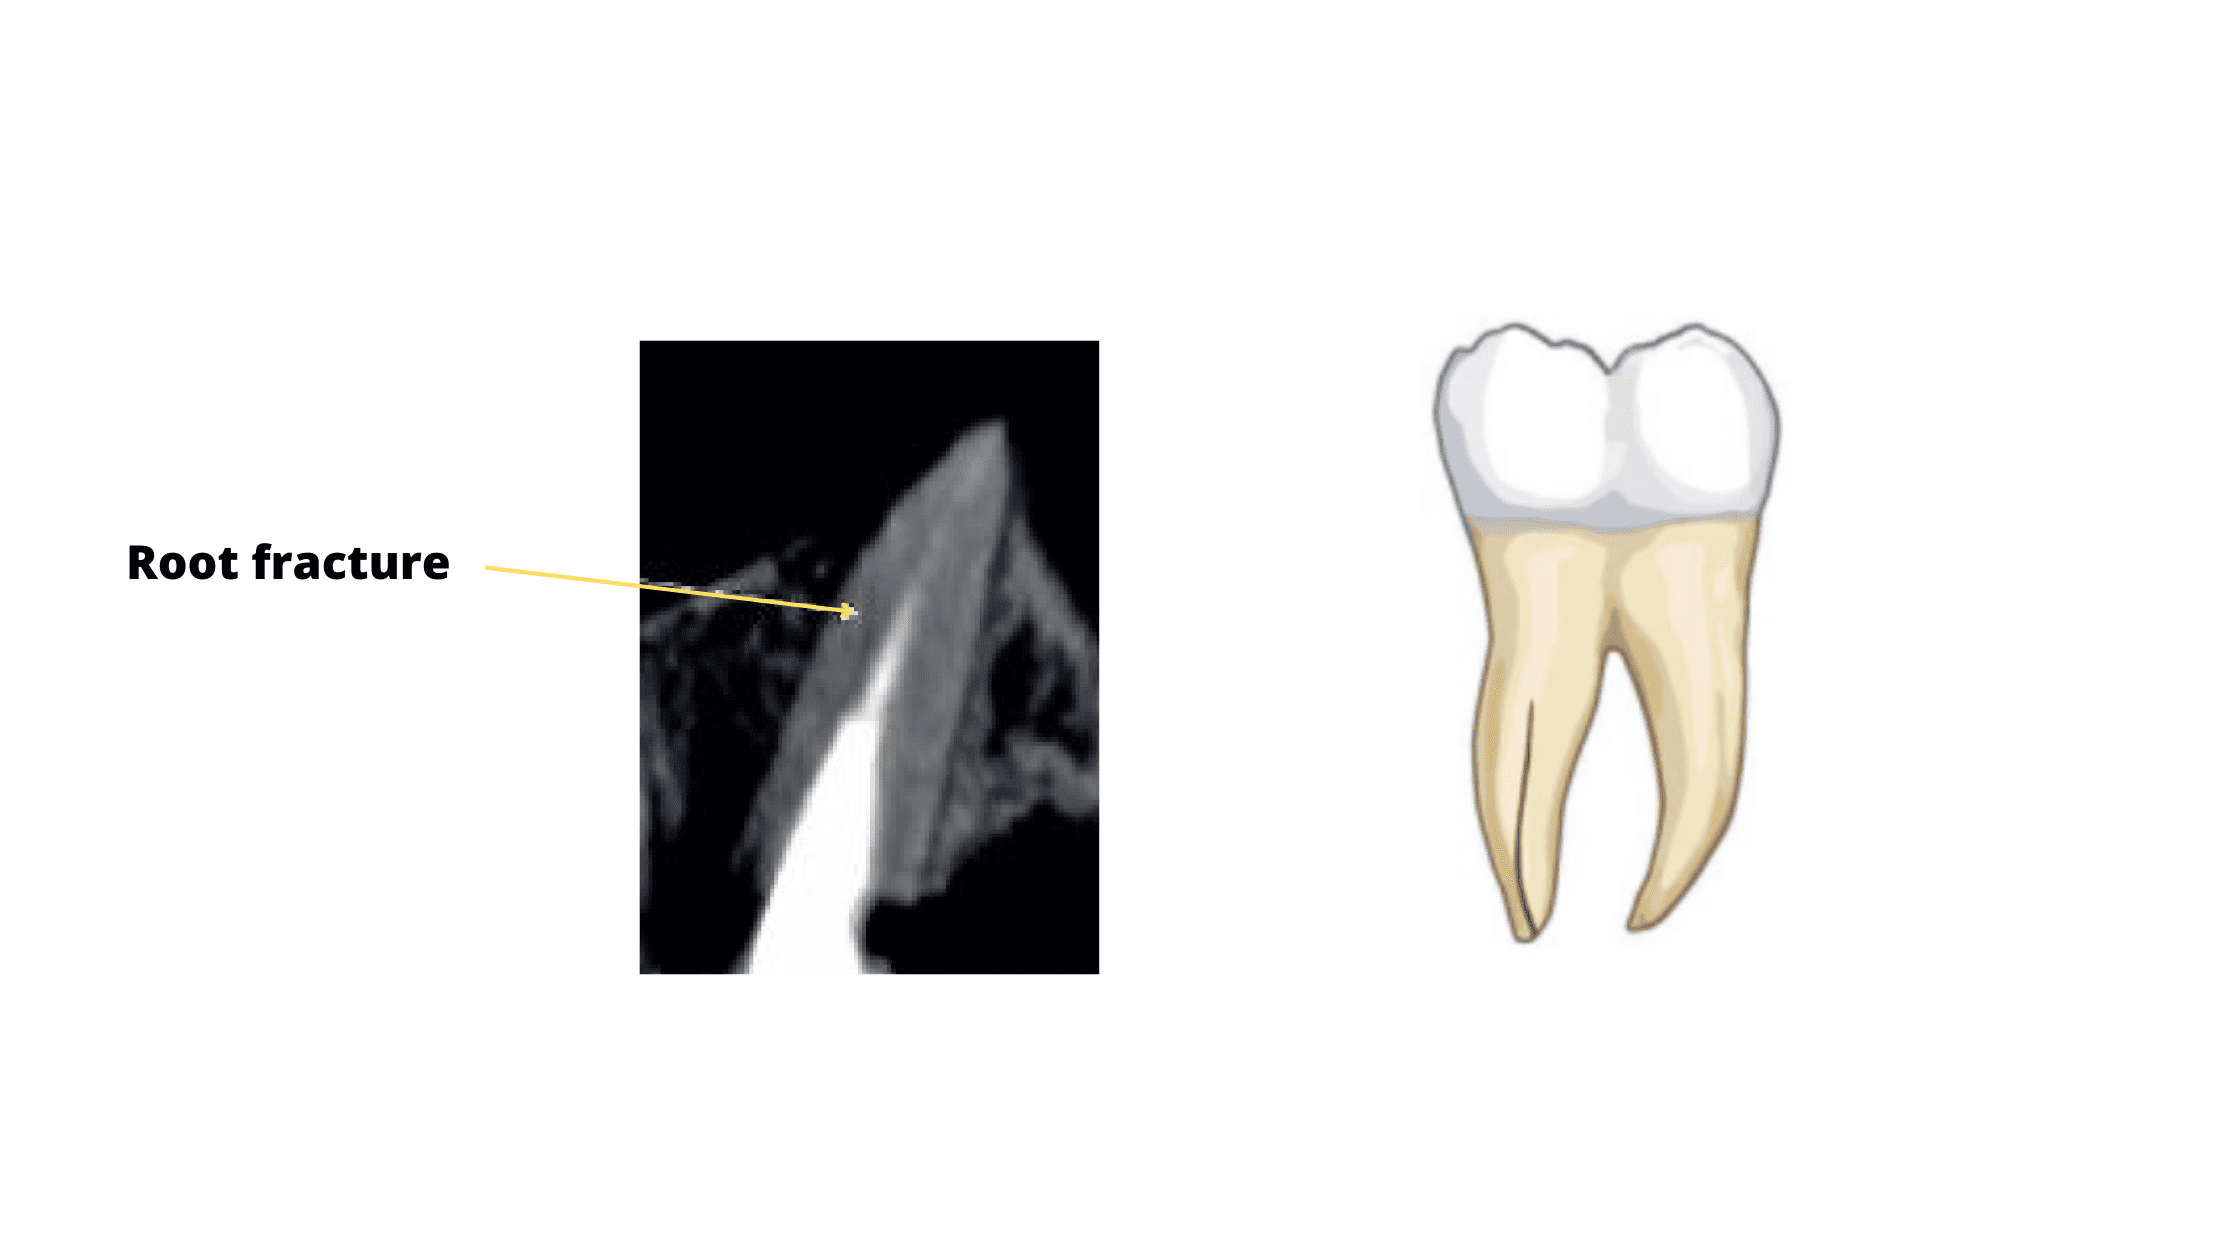 Root fracture after root canal therapy (x-ray image)